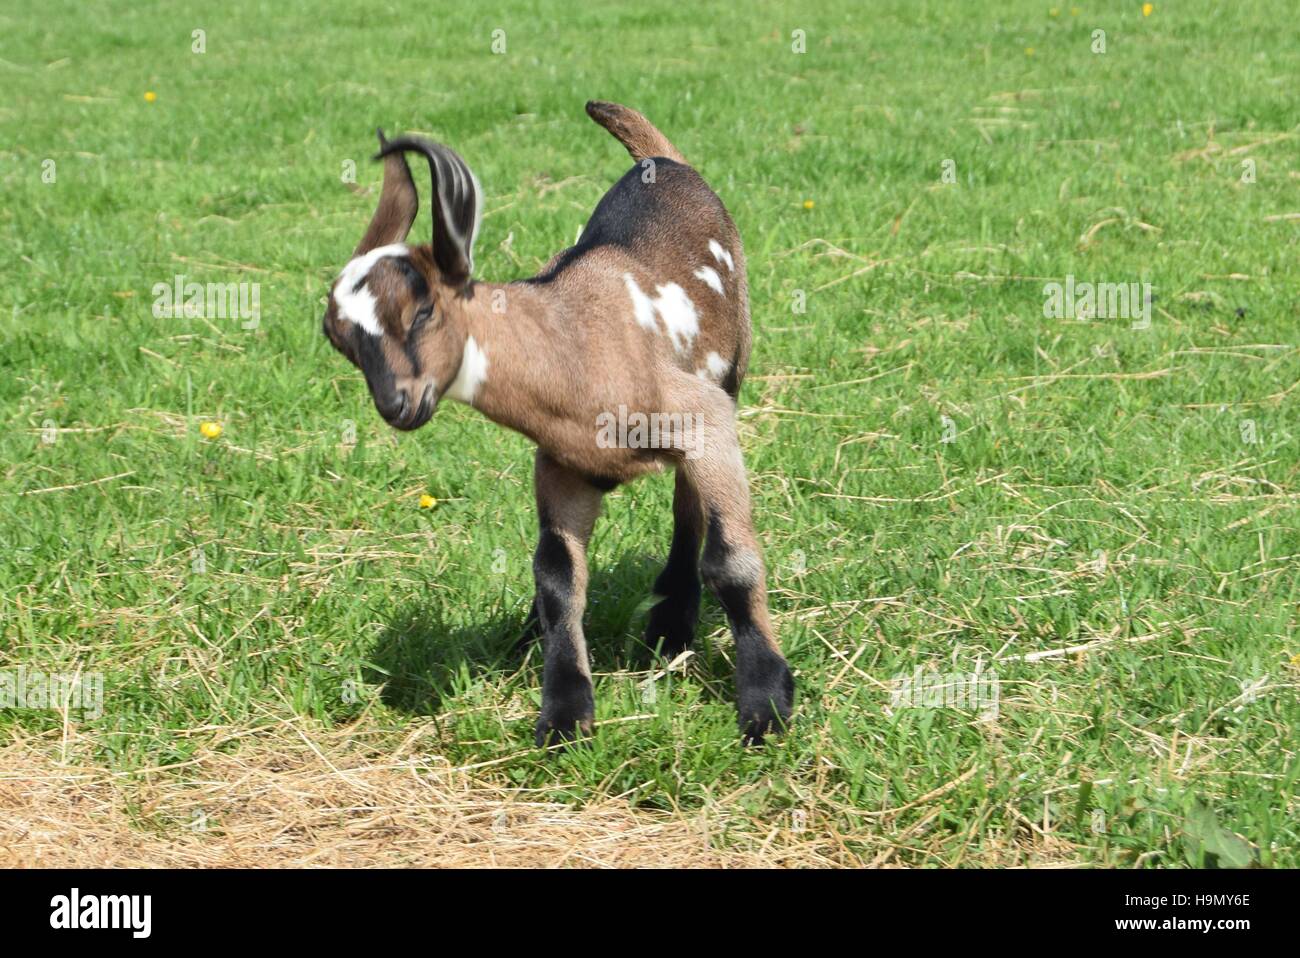 First day outside for this happy goat kid. Stock Photo